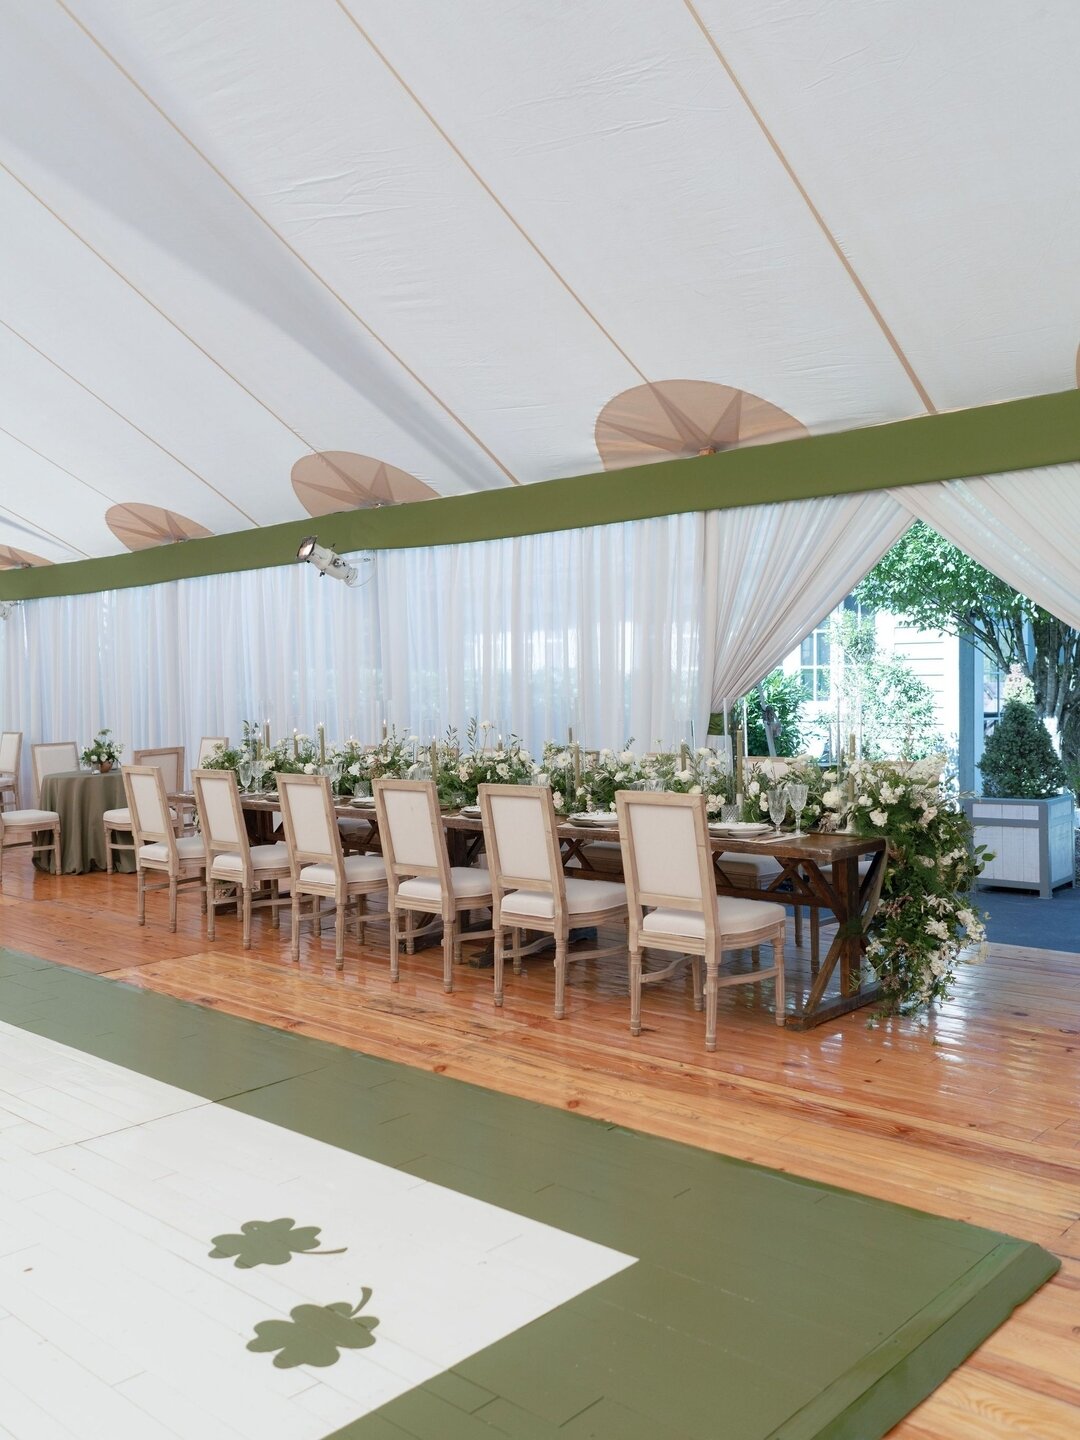 &quot;I can be your lucky penny, you can be my four leaf clover&quot; 🍀 Happy St. Patrick&rsquo;s Day! 
.
.
.
#stpatricksday #greenwedding #tentdraping #fourleafclover #eventdraping #tententrance #polecovers #valance #greenvalance #walldraping #luxu